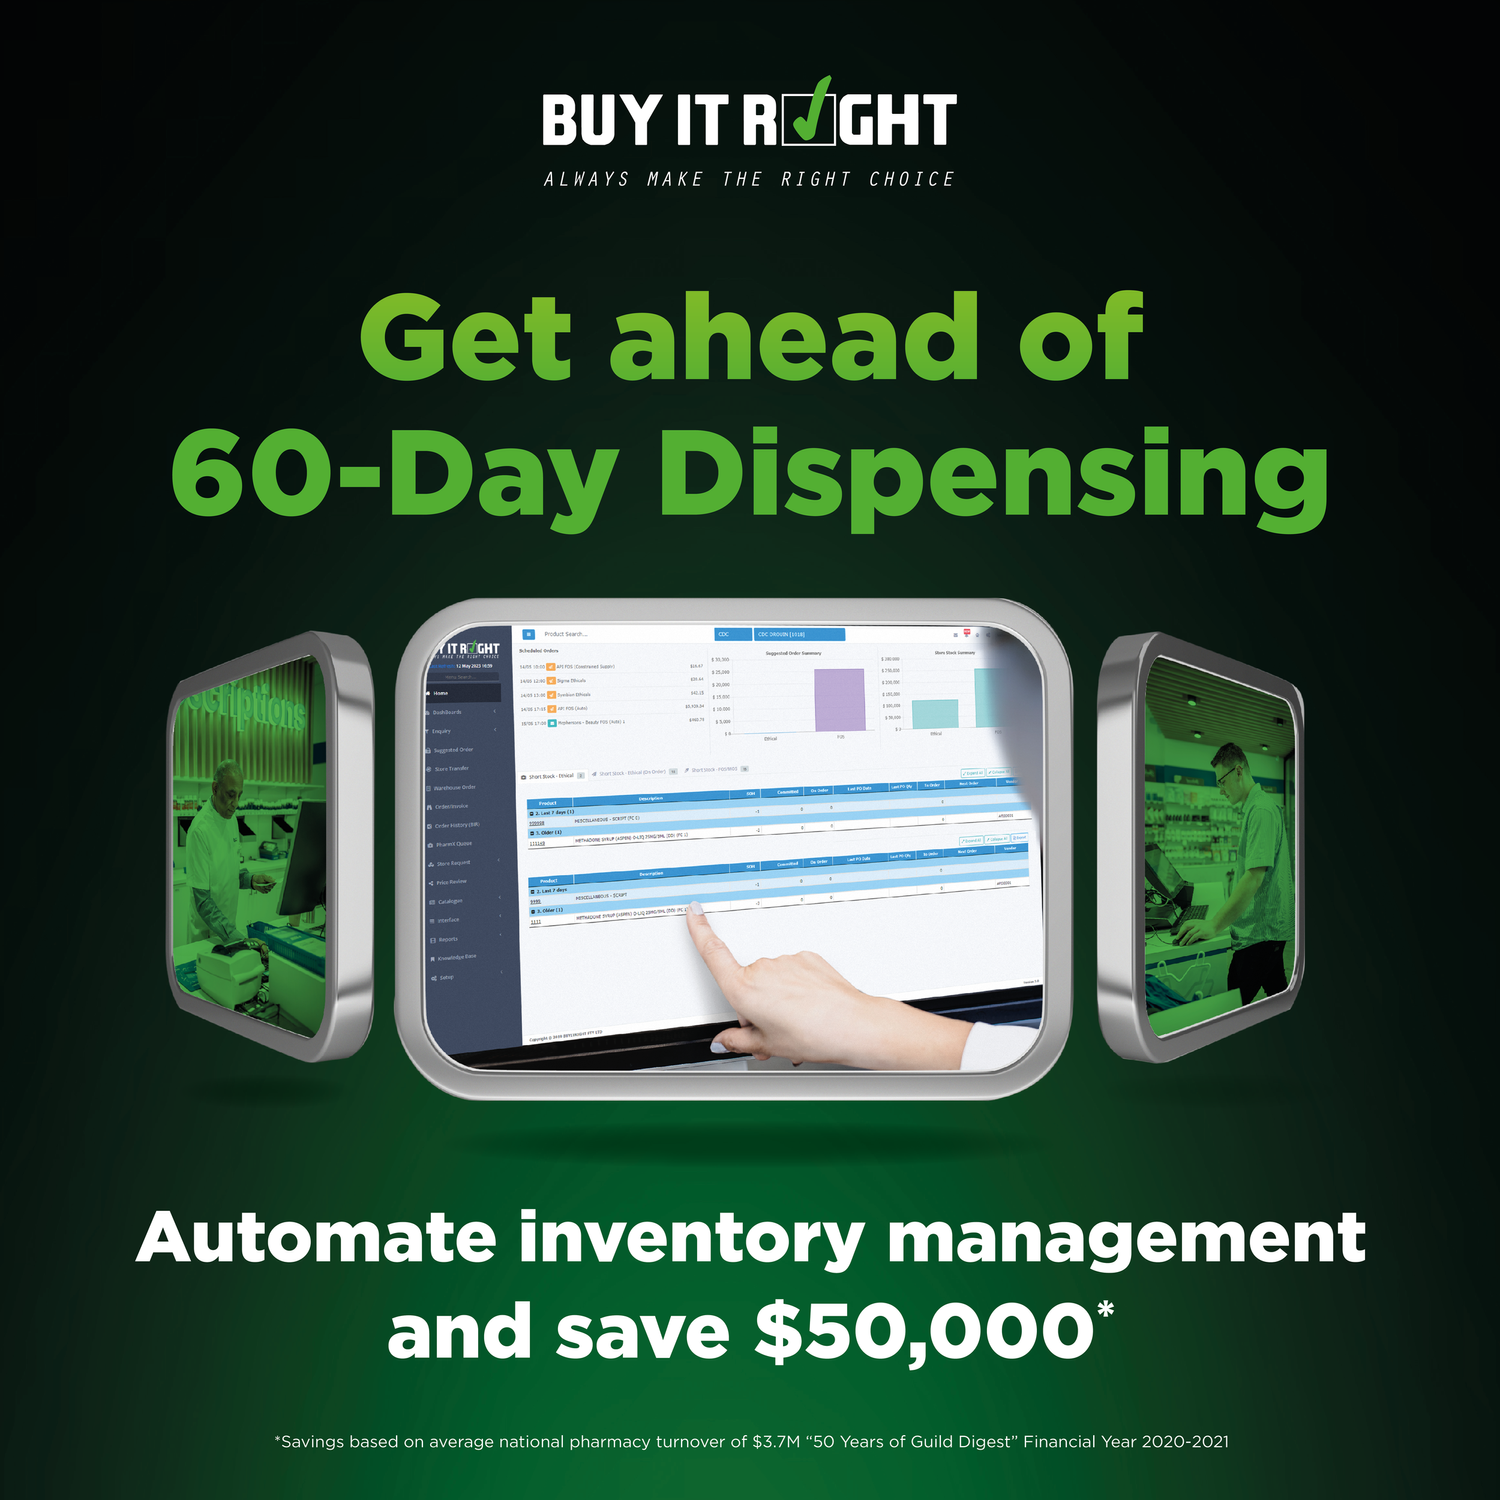 Inventory management technology will optimise business performance and reduce the impact of 60-Day Dispensing